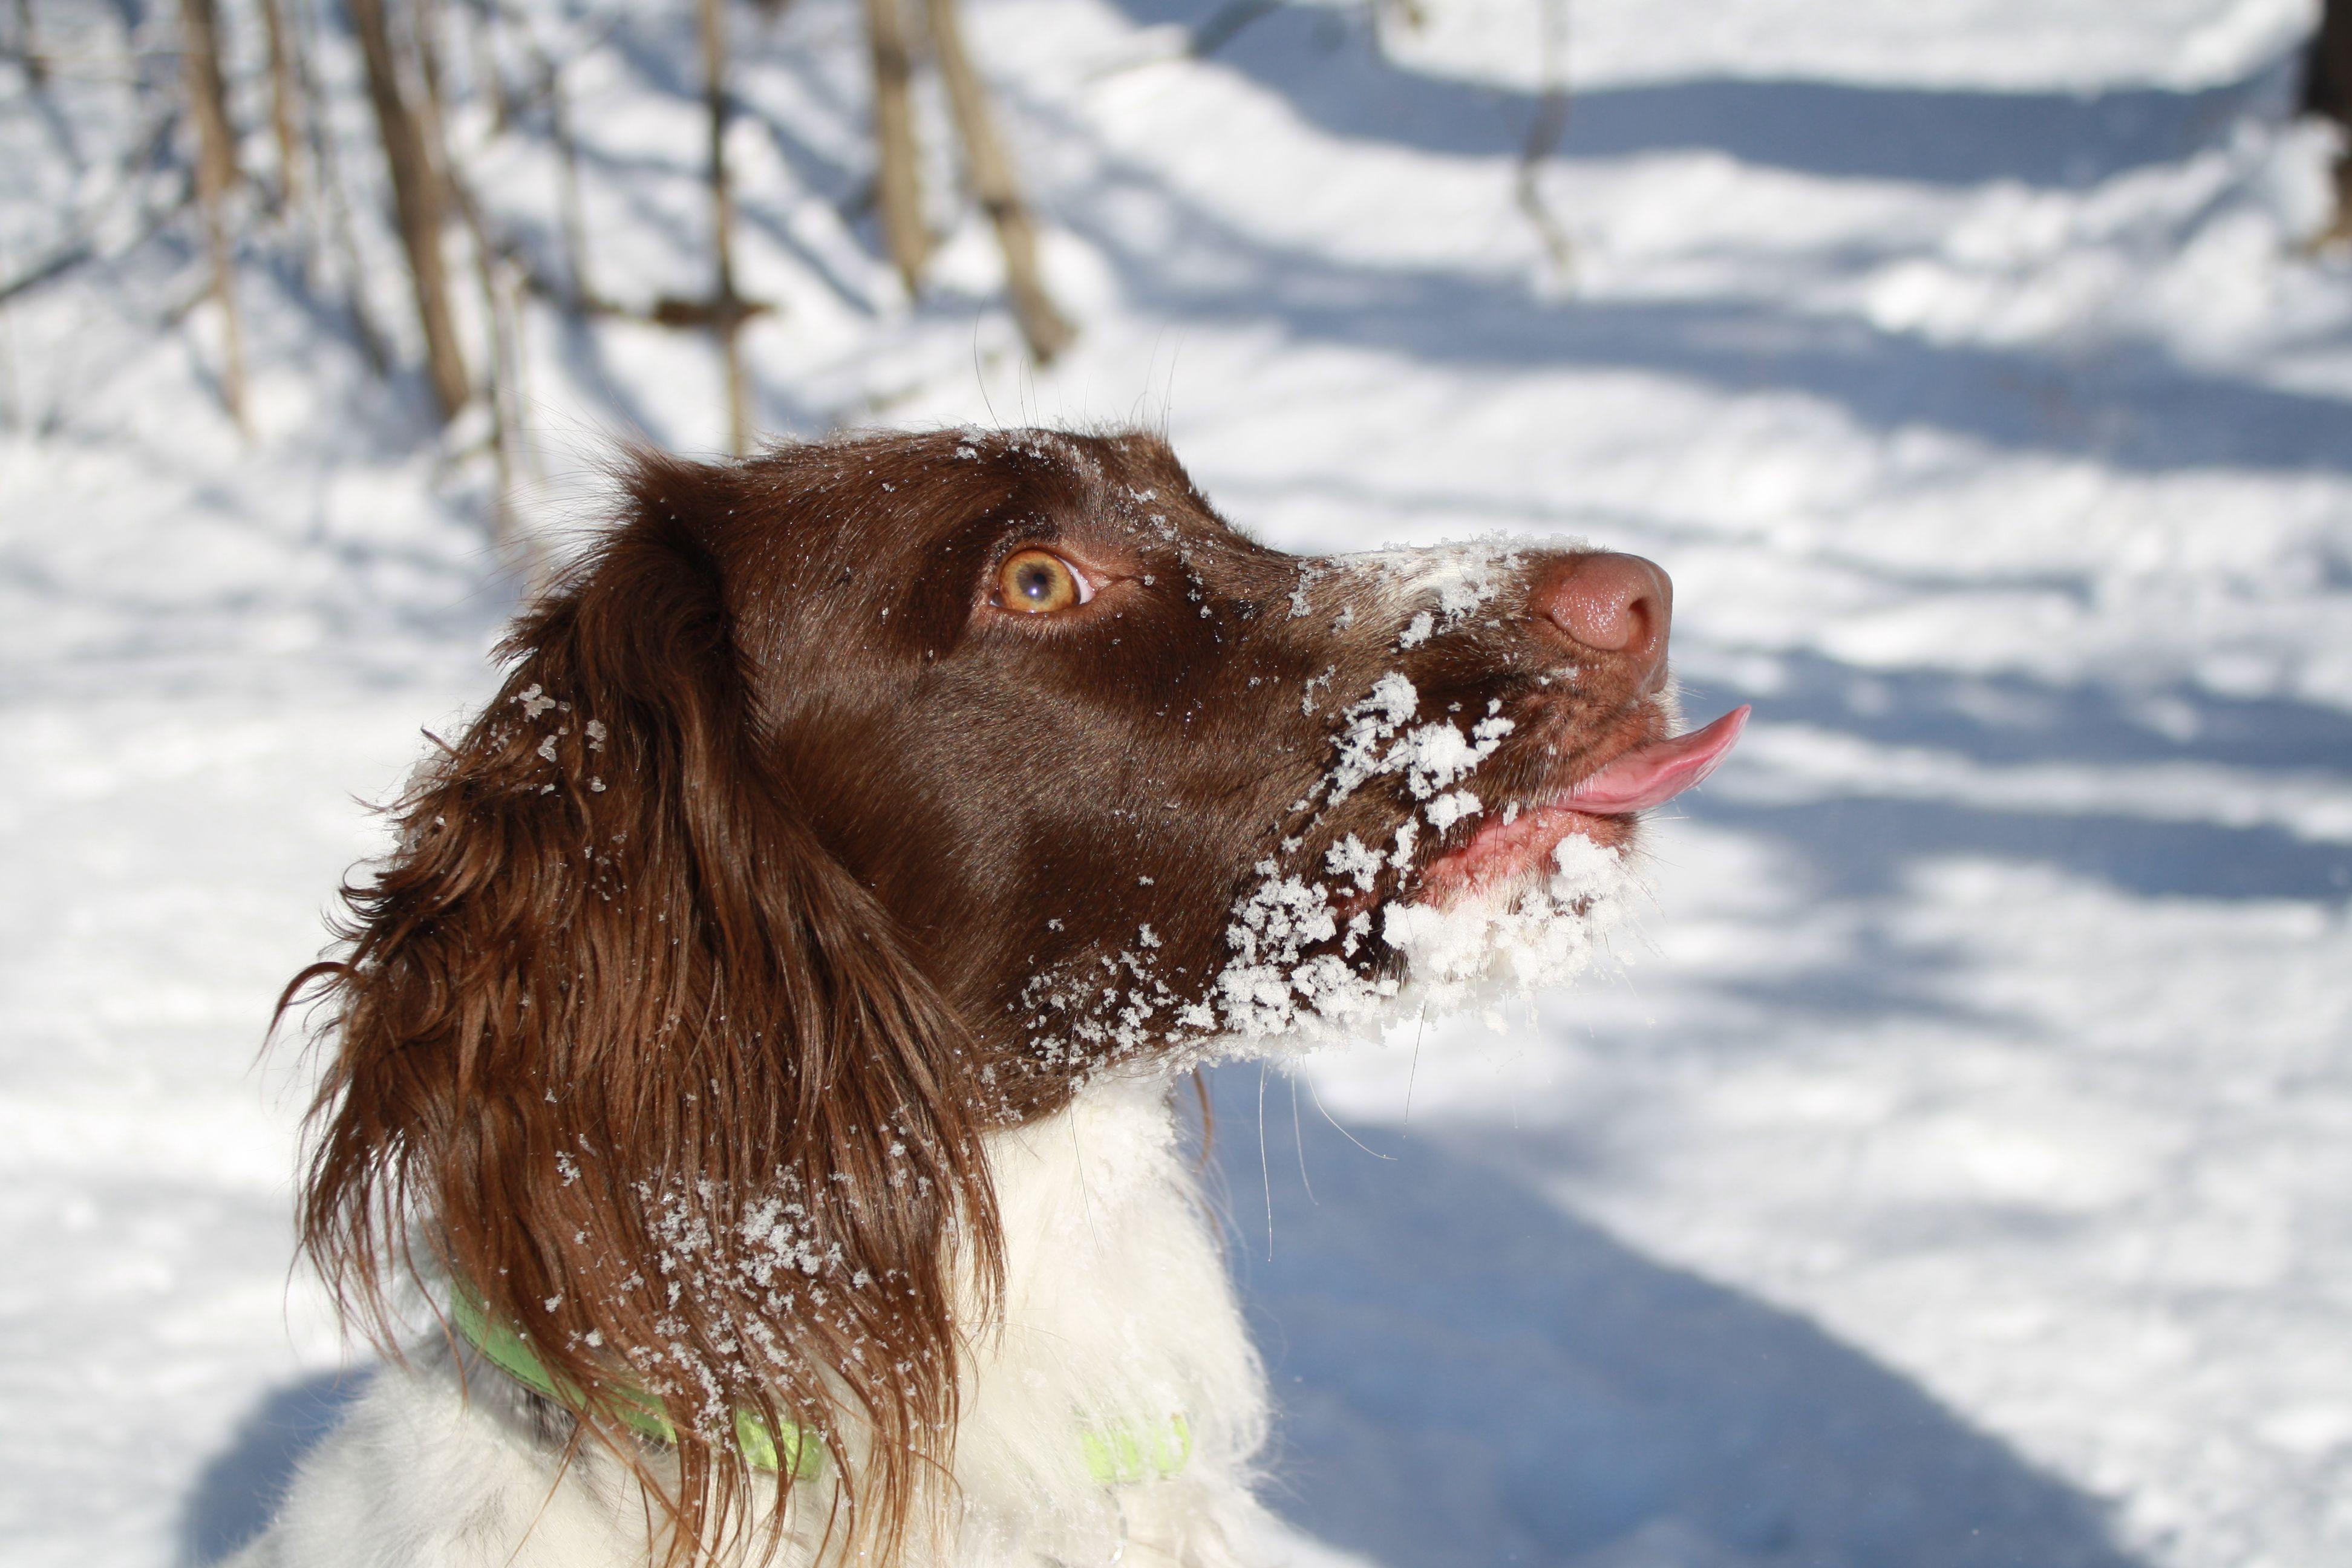 English Springer Spaniel in snow closeup wallpaper and image